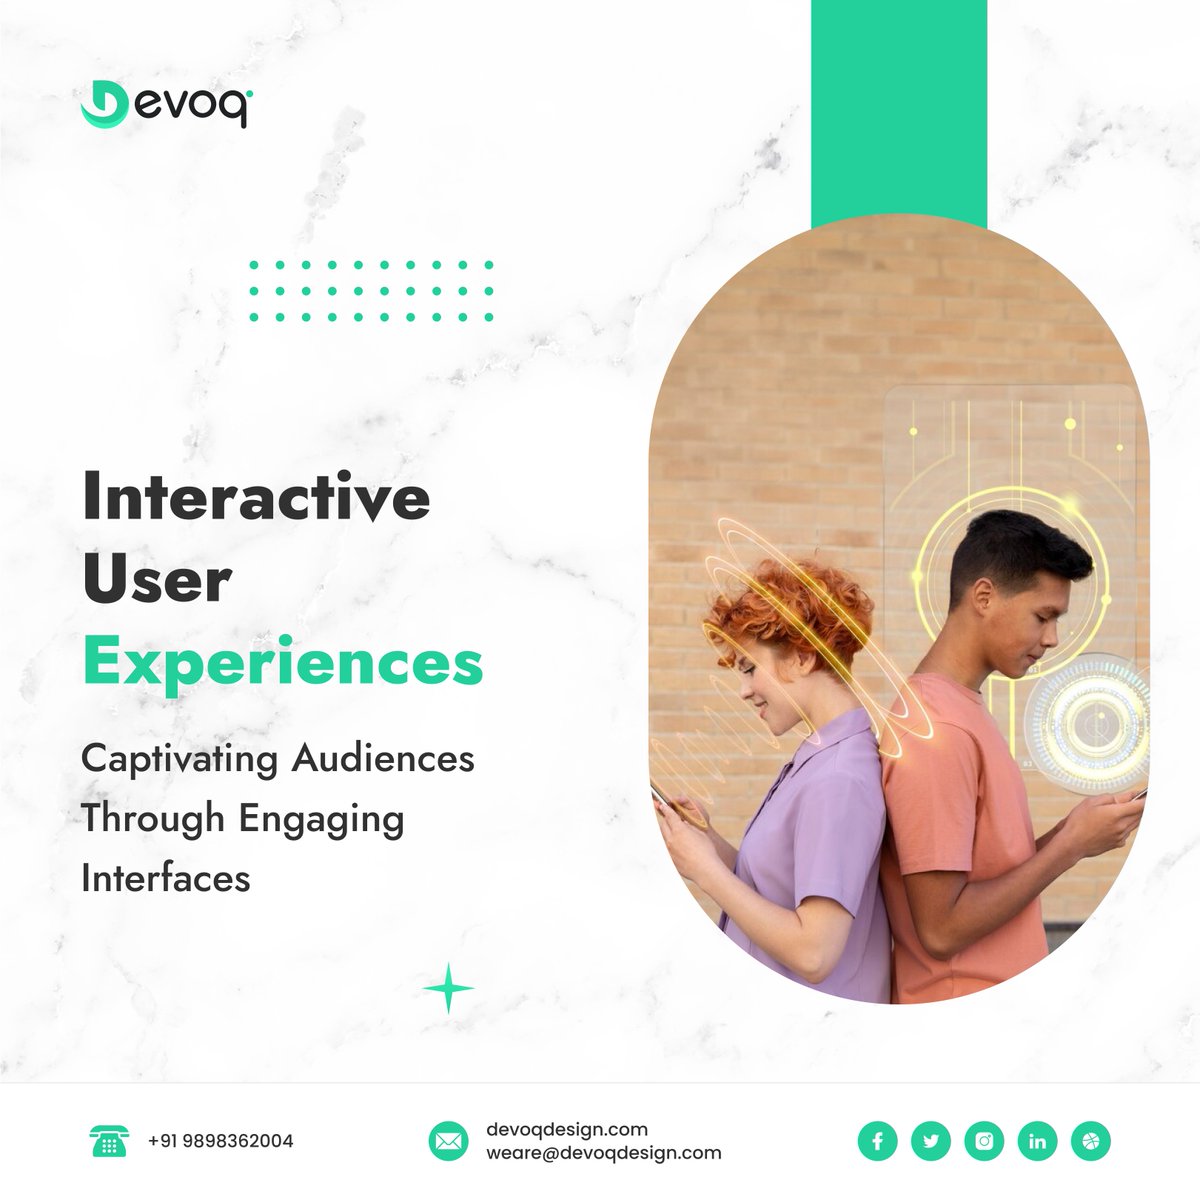 At Devoq Design, we specialize in creating designs that fully engage users, making a strong and memorable impact.

#UXDesign #UIDesign #UserExperience #UserInterface #UIUX #DesignThinking #UXResearch #InteractionDesign #DigitalDesign #WebDesign #MobileUX #ProductDesign